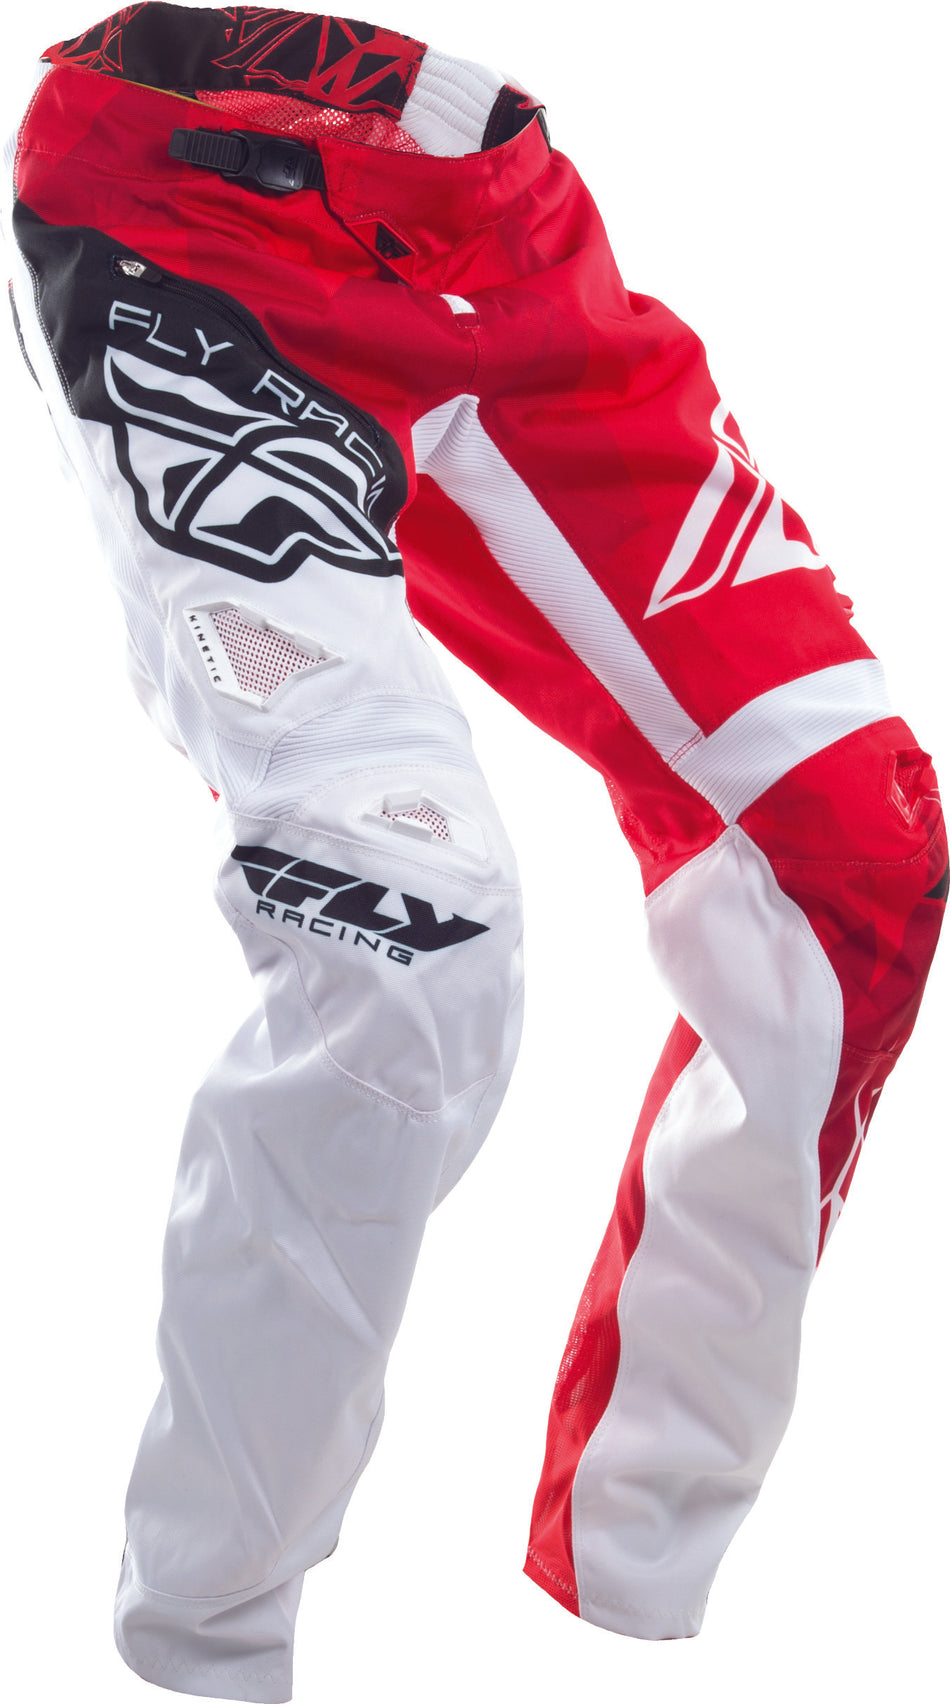 FLY RACING Bicycle Crux Pant Red/White Sz 38 370-02238